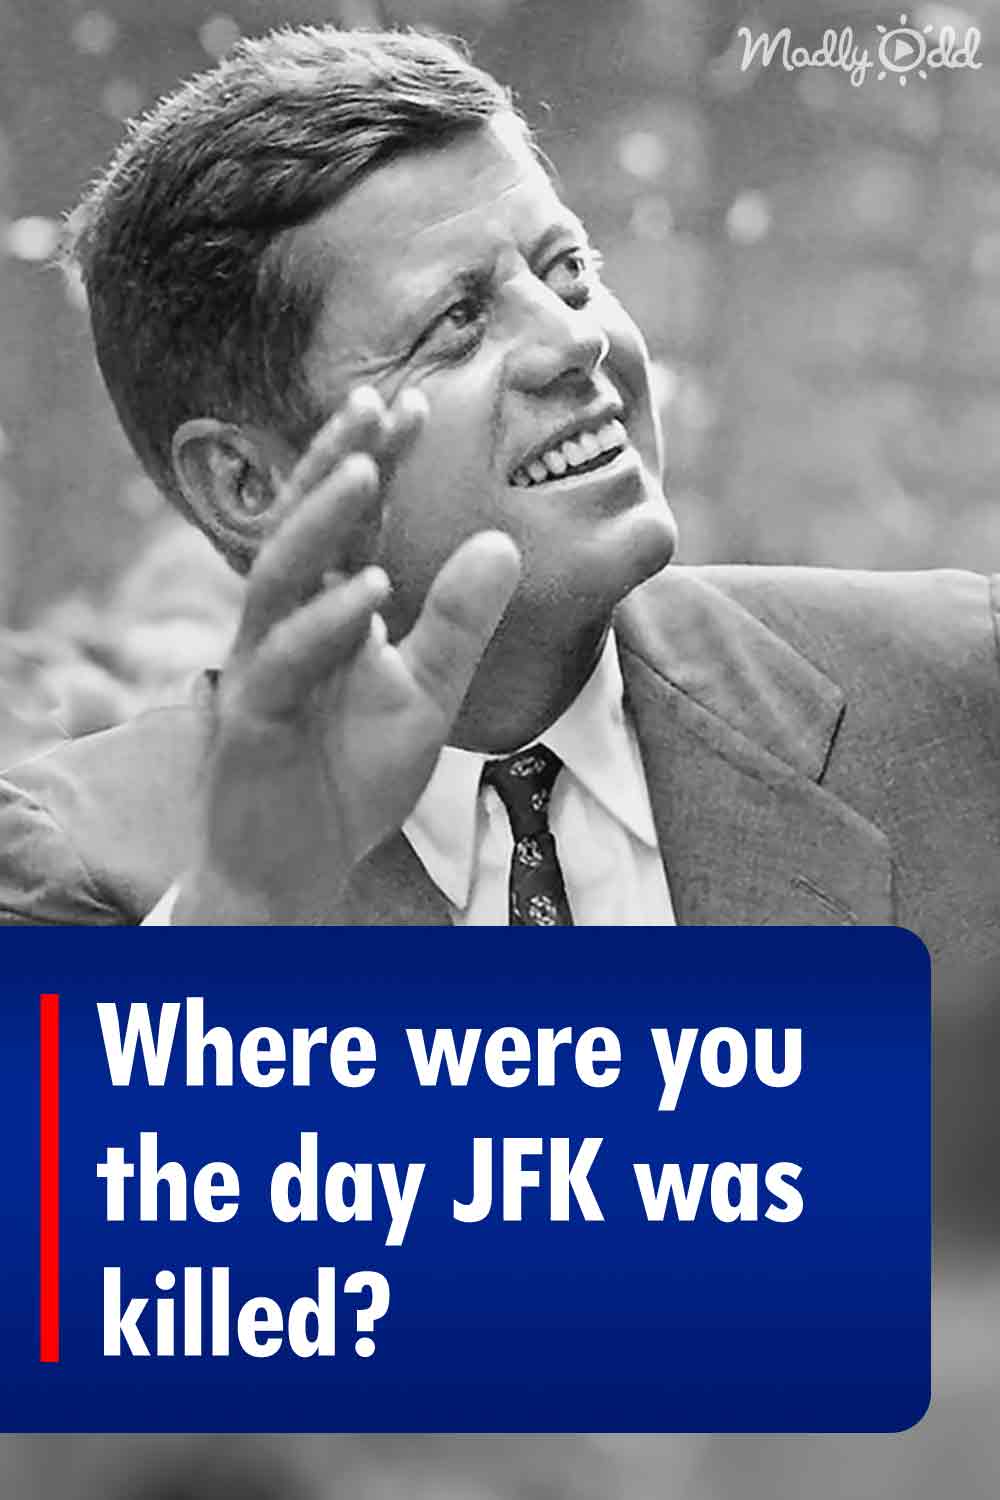 Where were you the day JFK was killed?